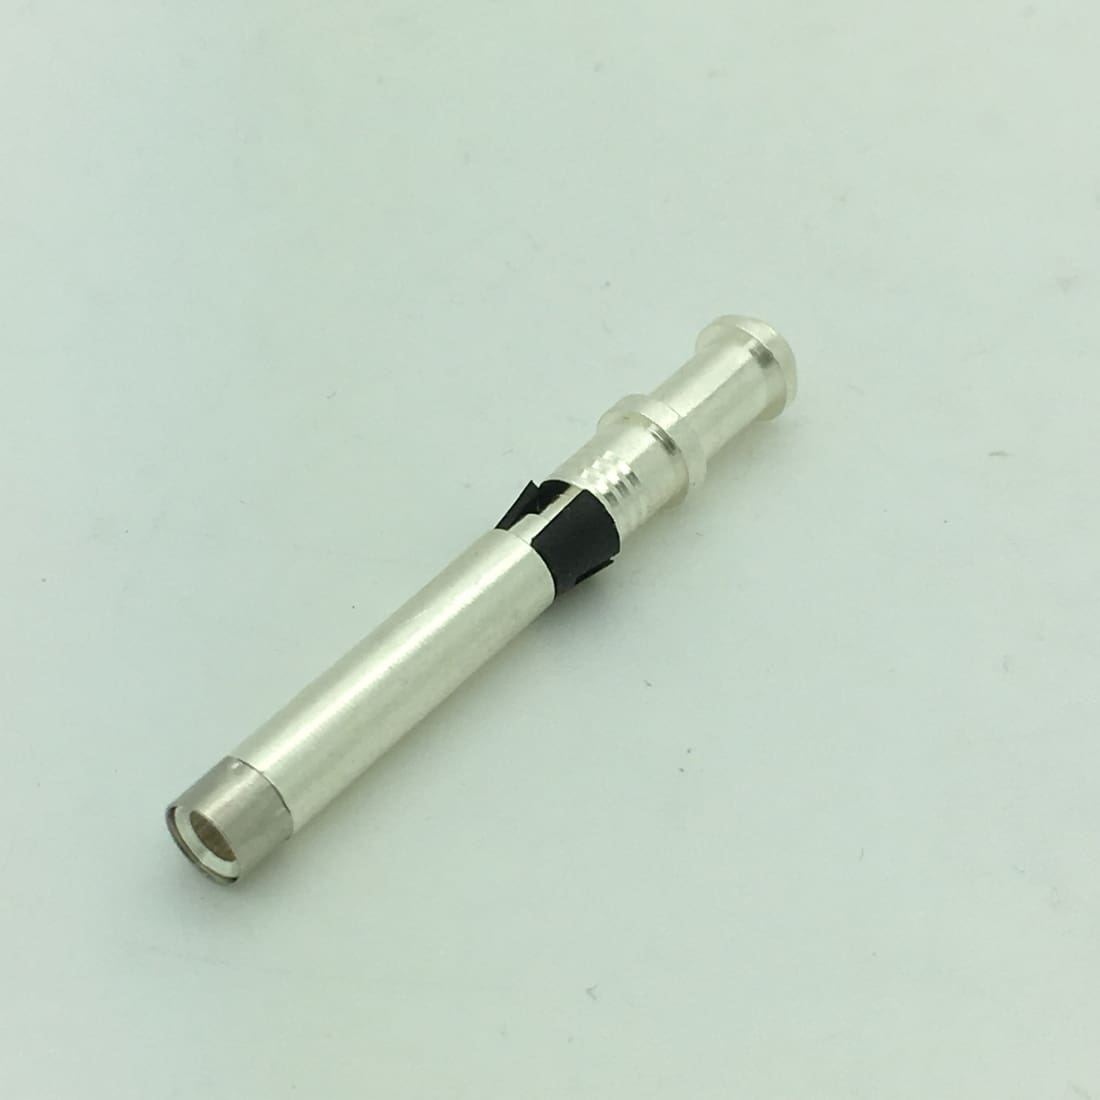 Auxilary Contact for REMA 160A SOCKET EURO DIN Connector